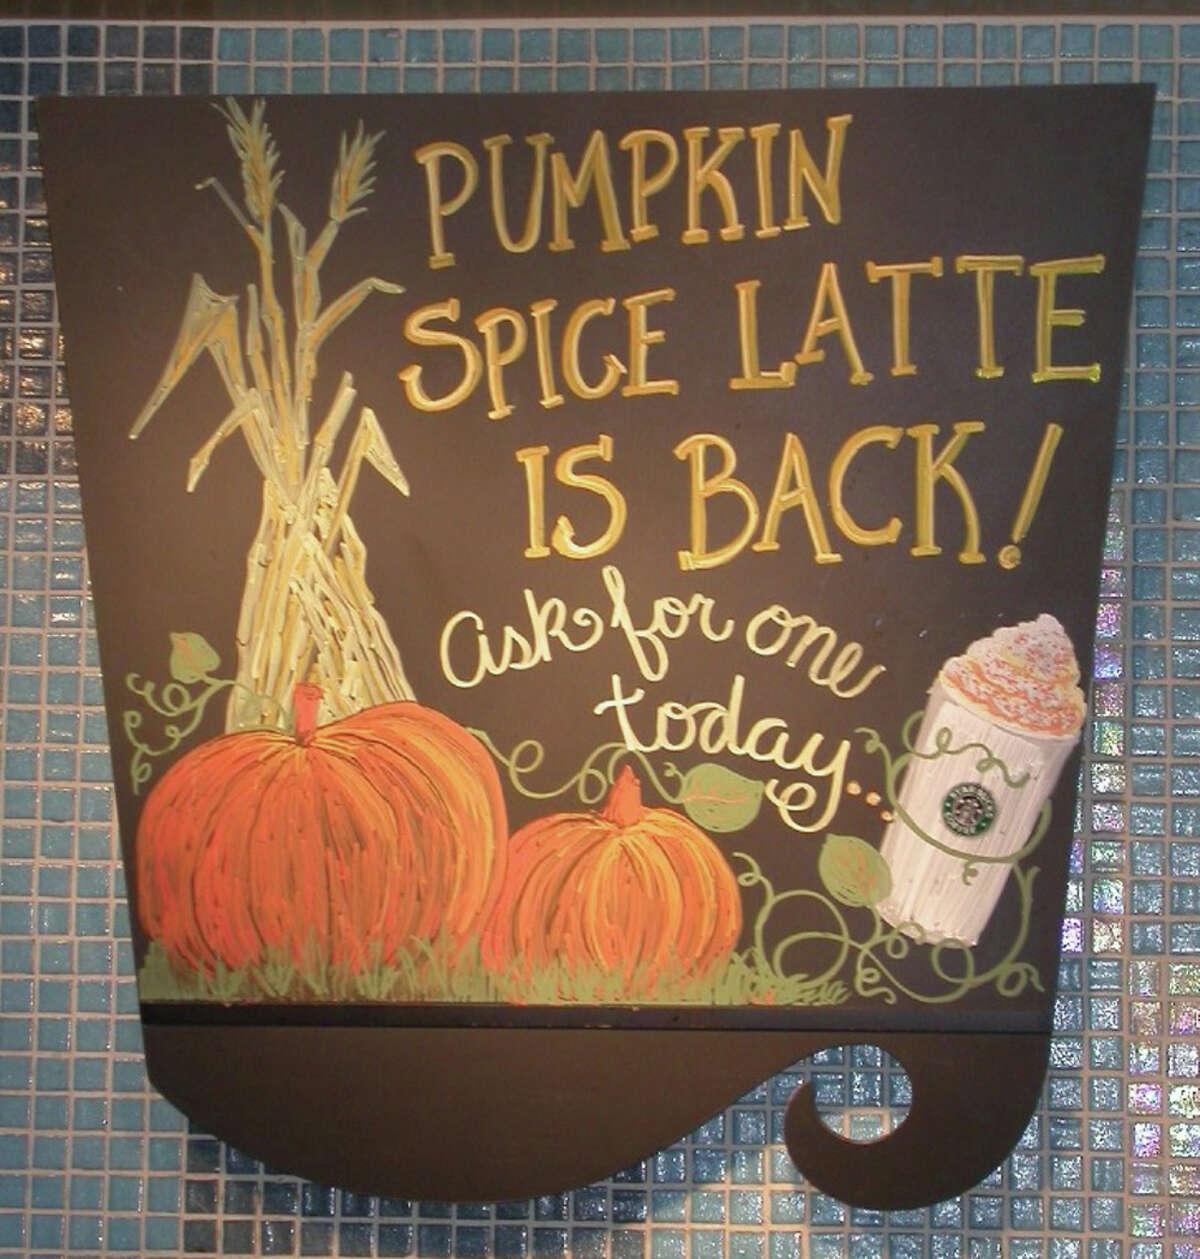 Pumpkin spice latte is back at Starbucks, and seemingly everywhere else.